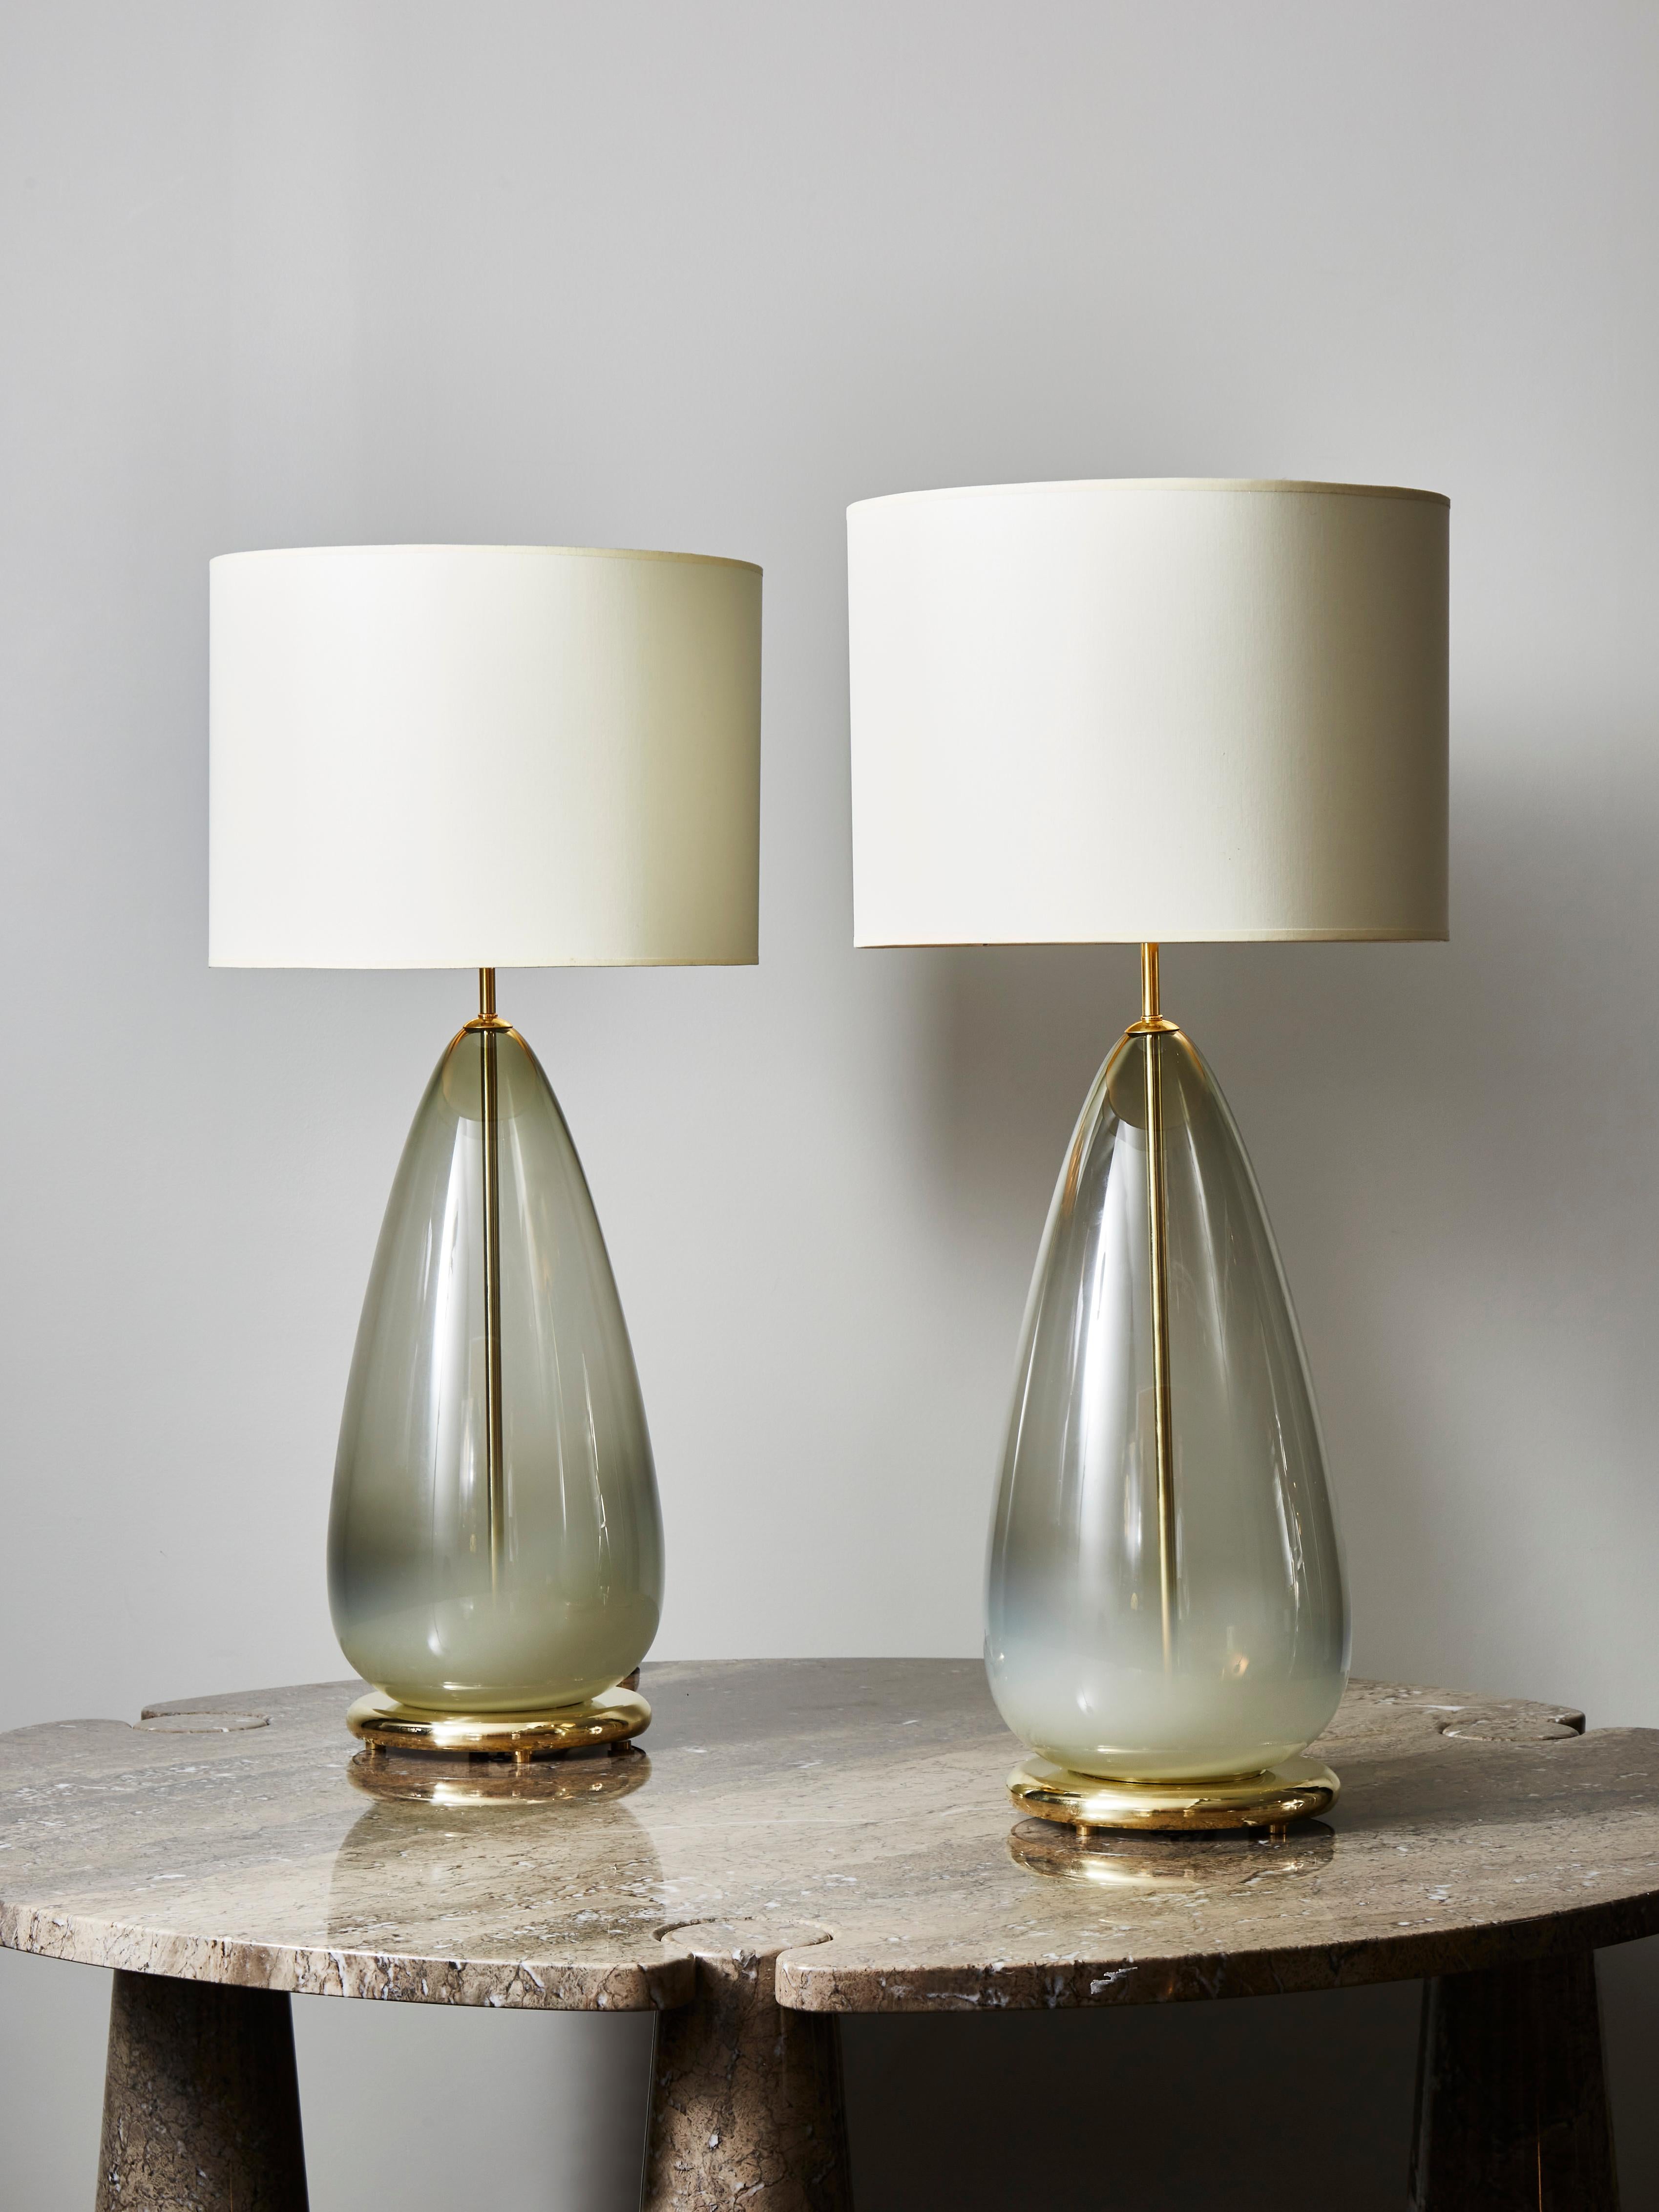 Pair of drop shaped Murano glass table lamps with a gradient grey tint, brass feet and center stem.